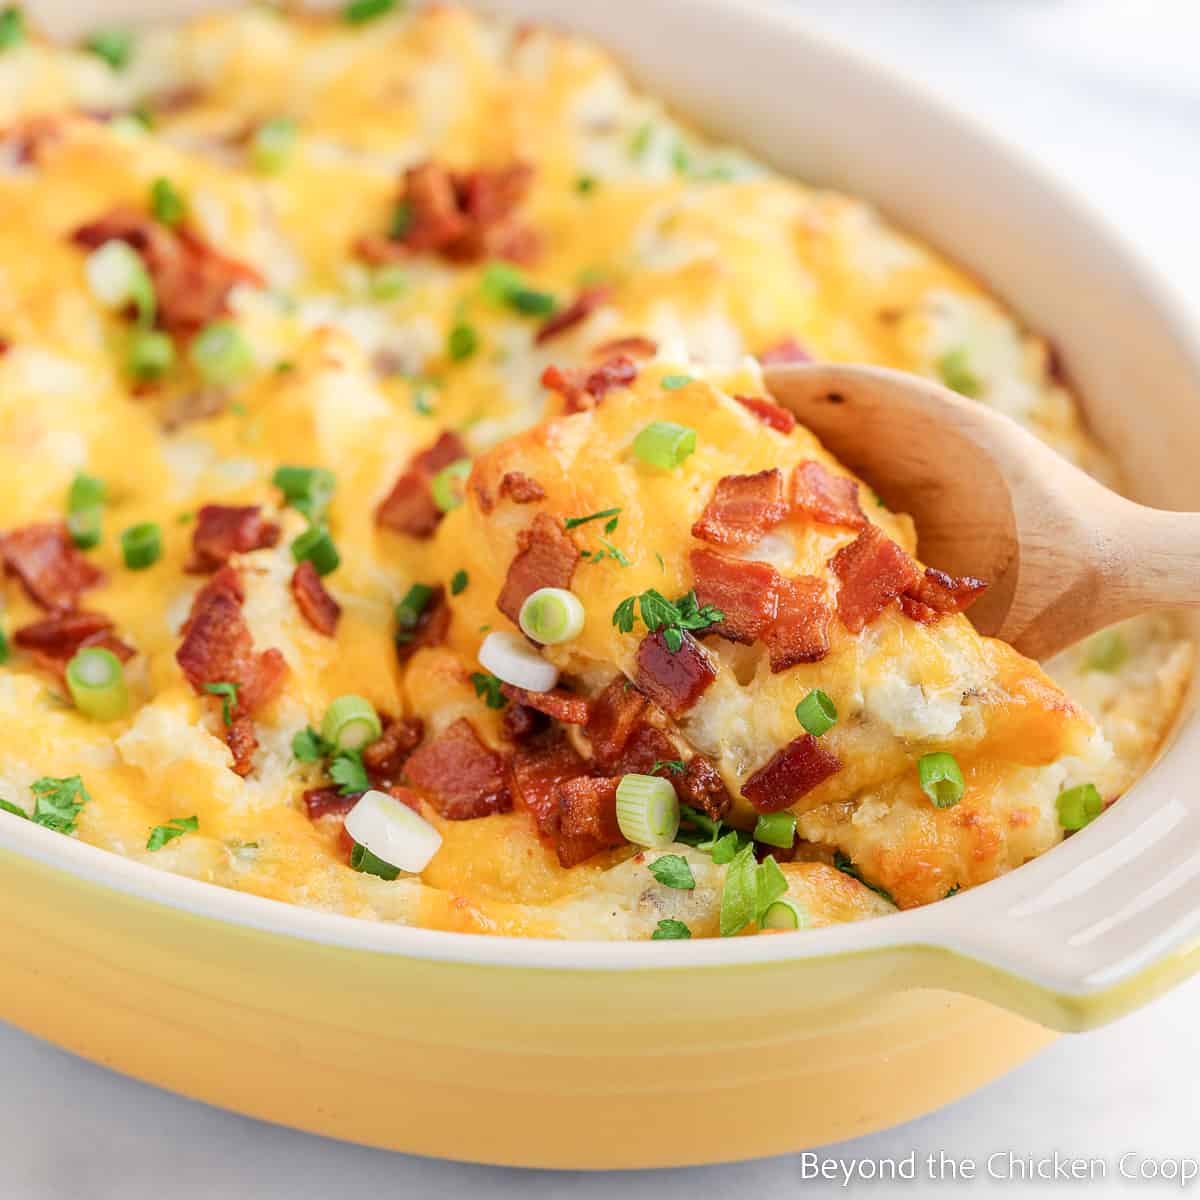 Mashed potatoes topped with cheese and bacon in a yellow dish.